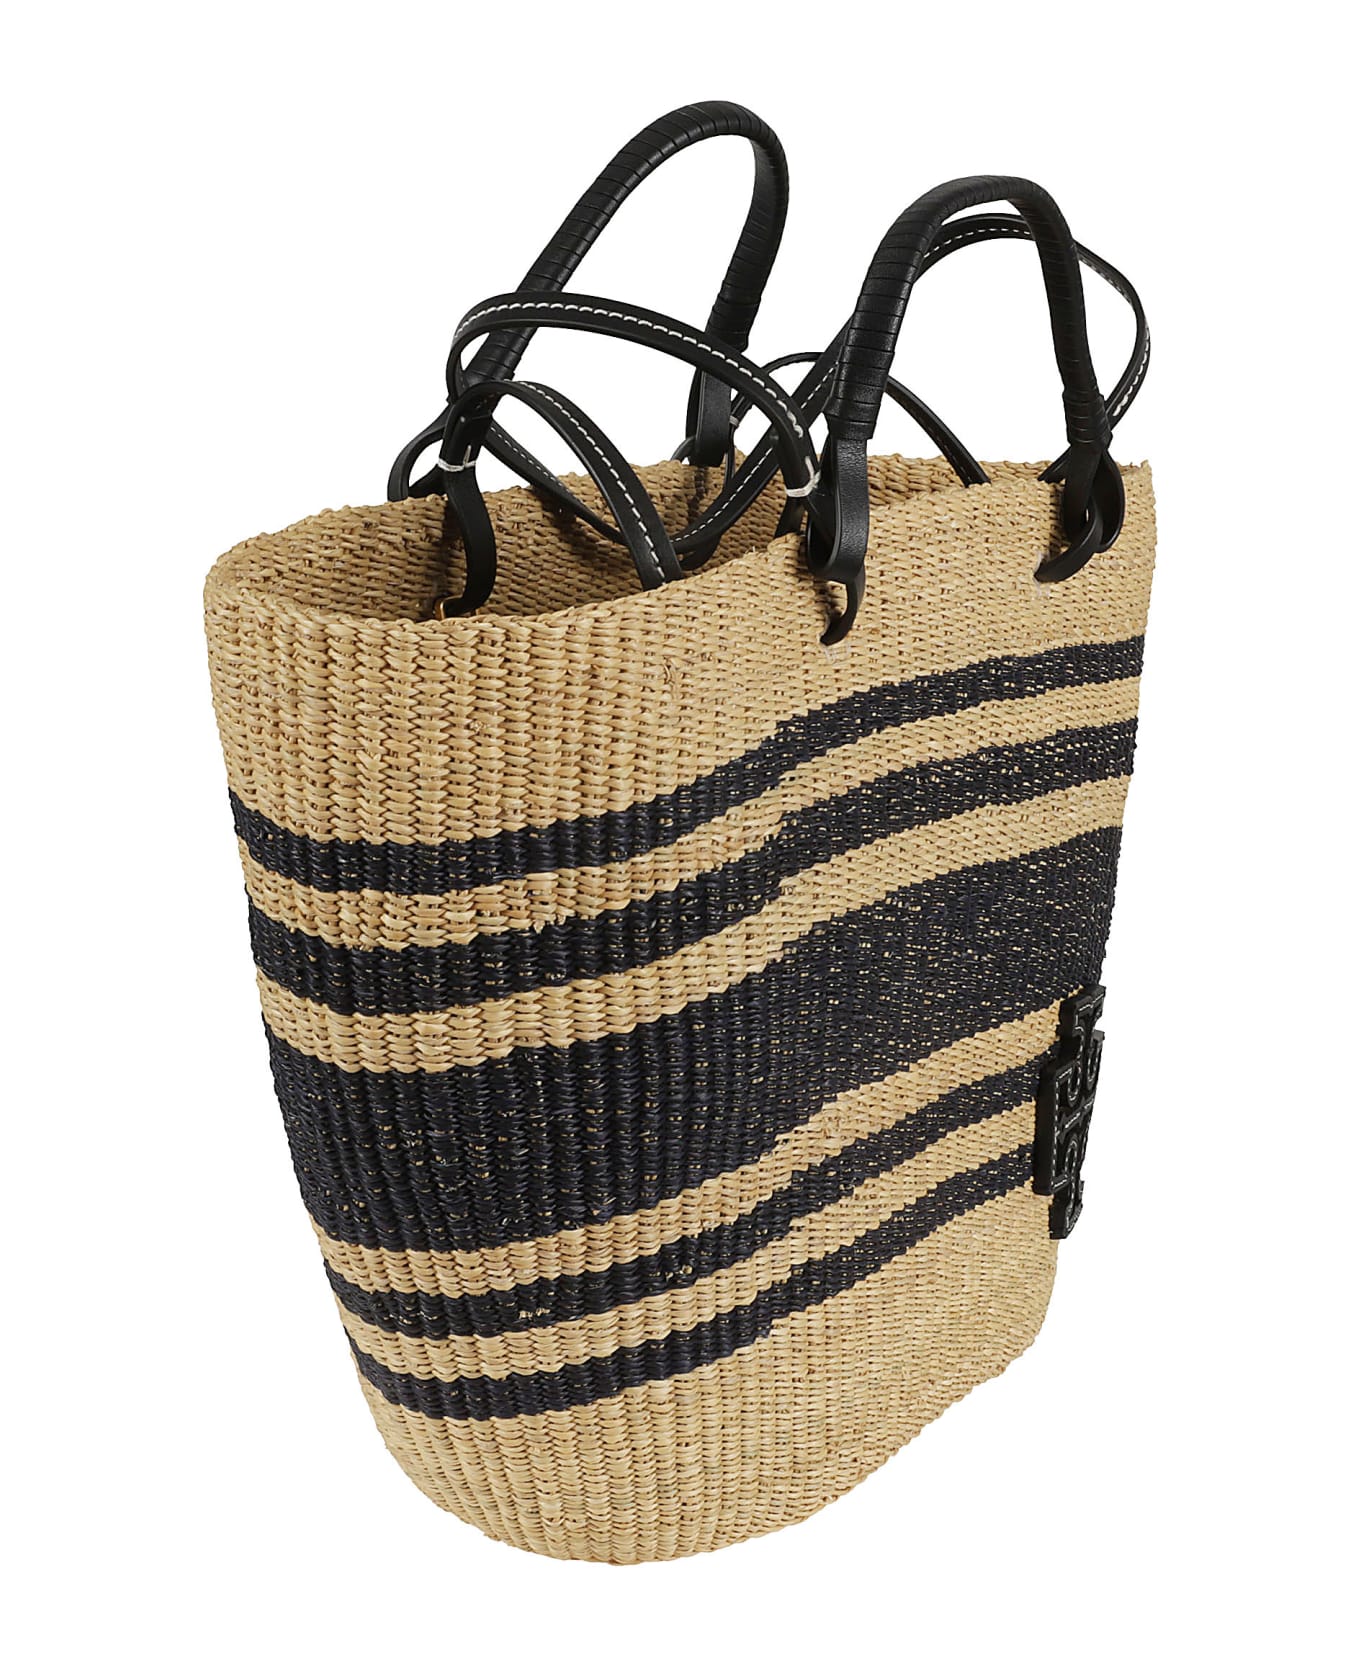 Tory Burch Weaved Tote トートバッグ